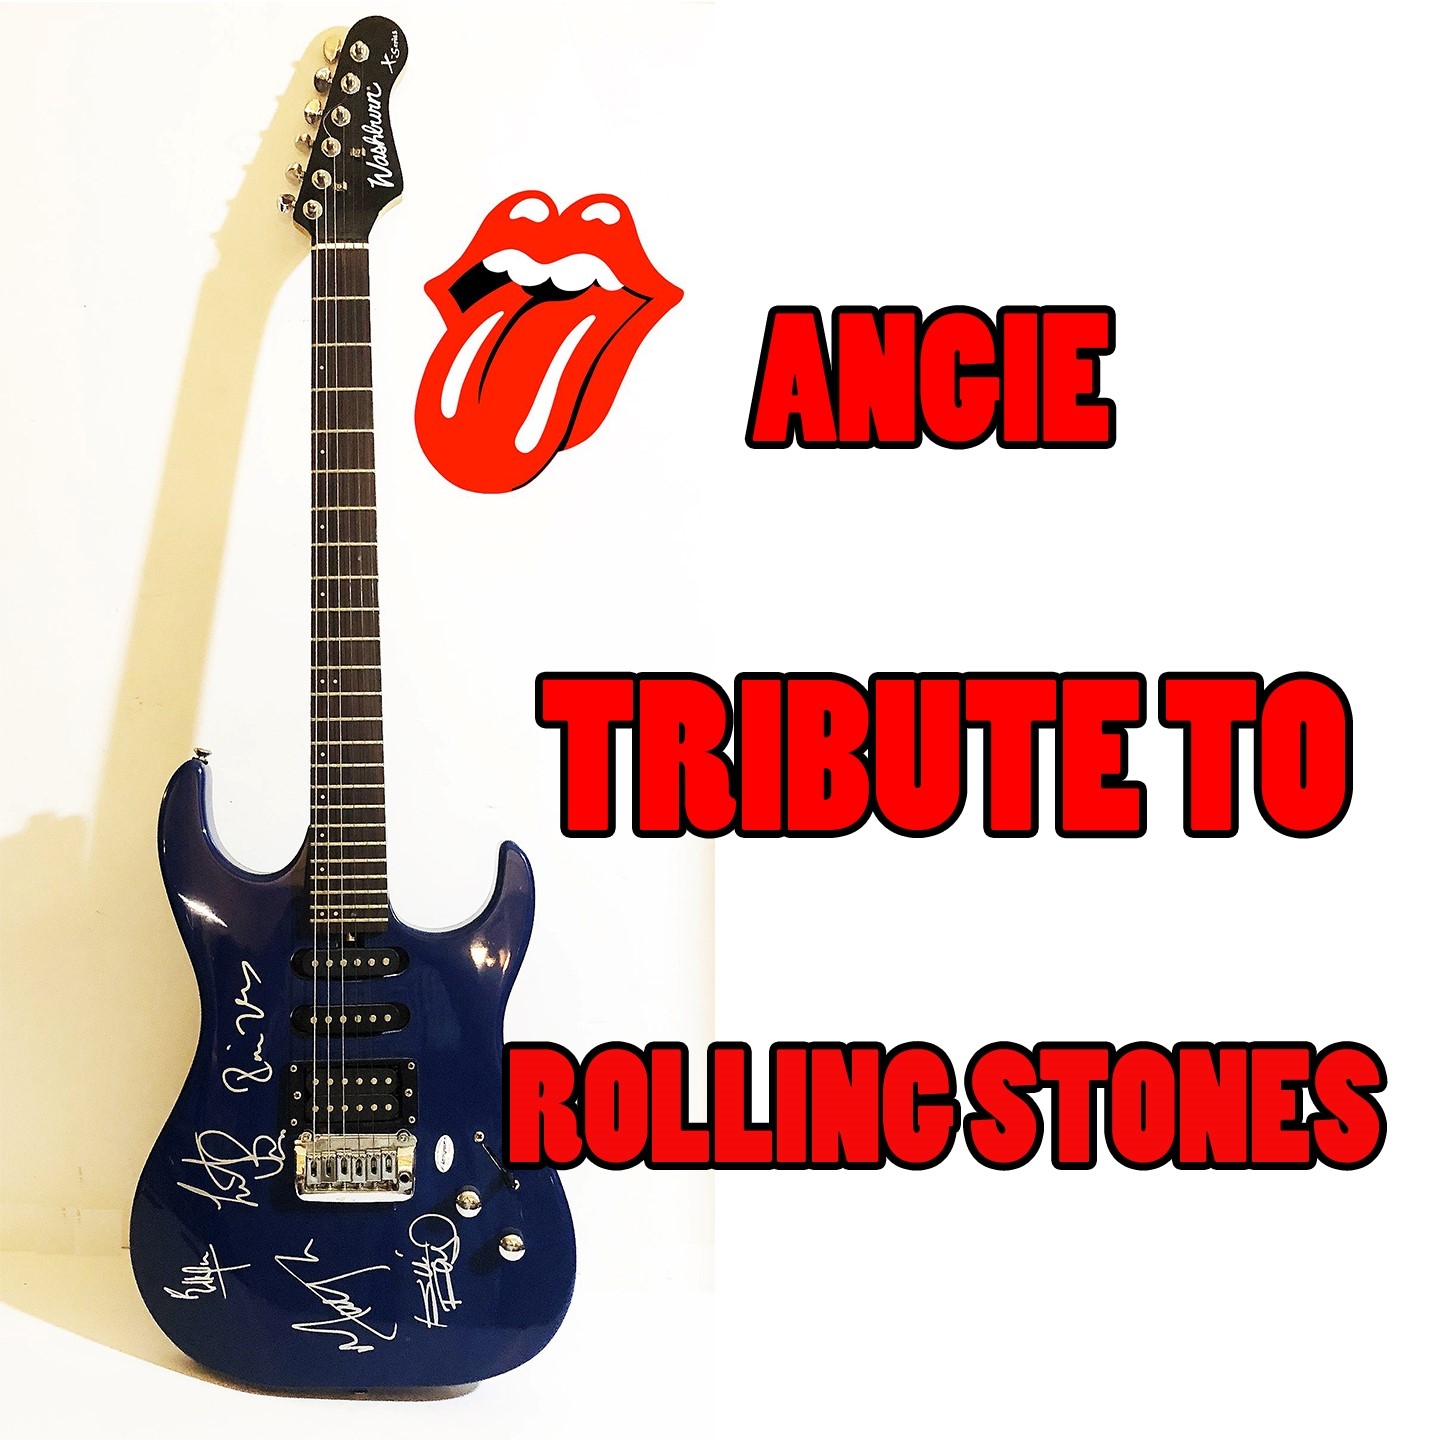 Angie (Tribute To Rolling Stones)